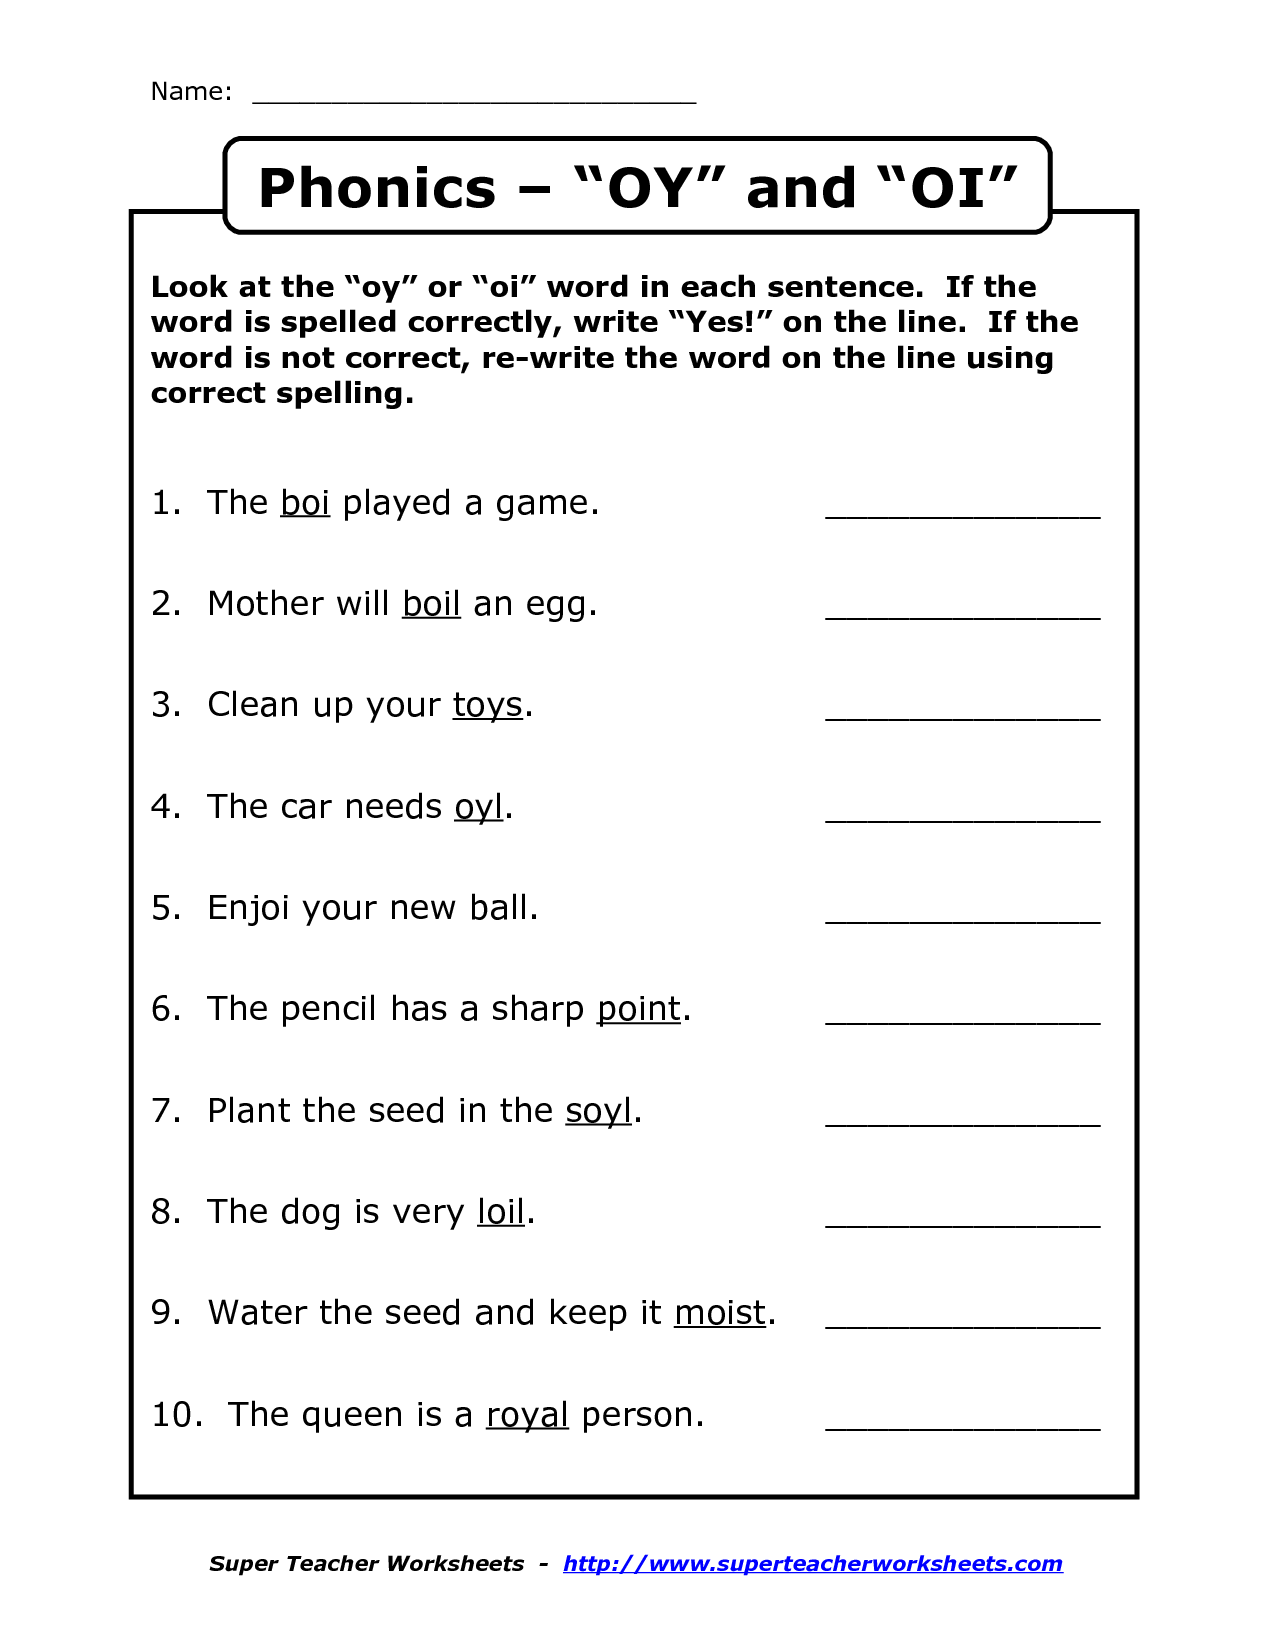 11-best-images-of-oi-oy-worksheets-diphthongs-oi-oy-word-sort-picture-oi-and-oy-phonics